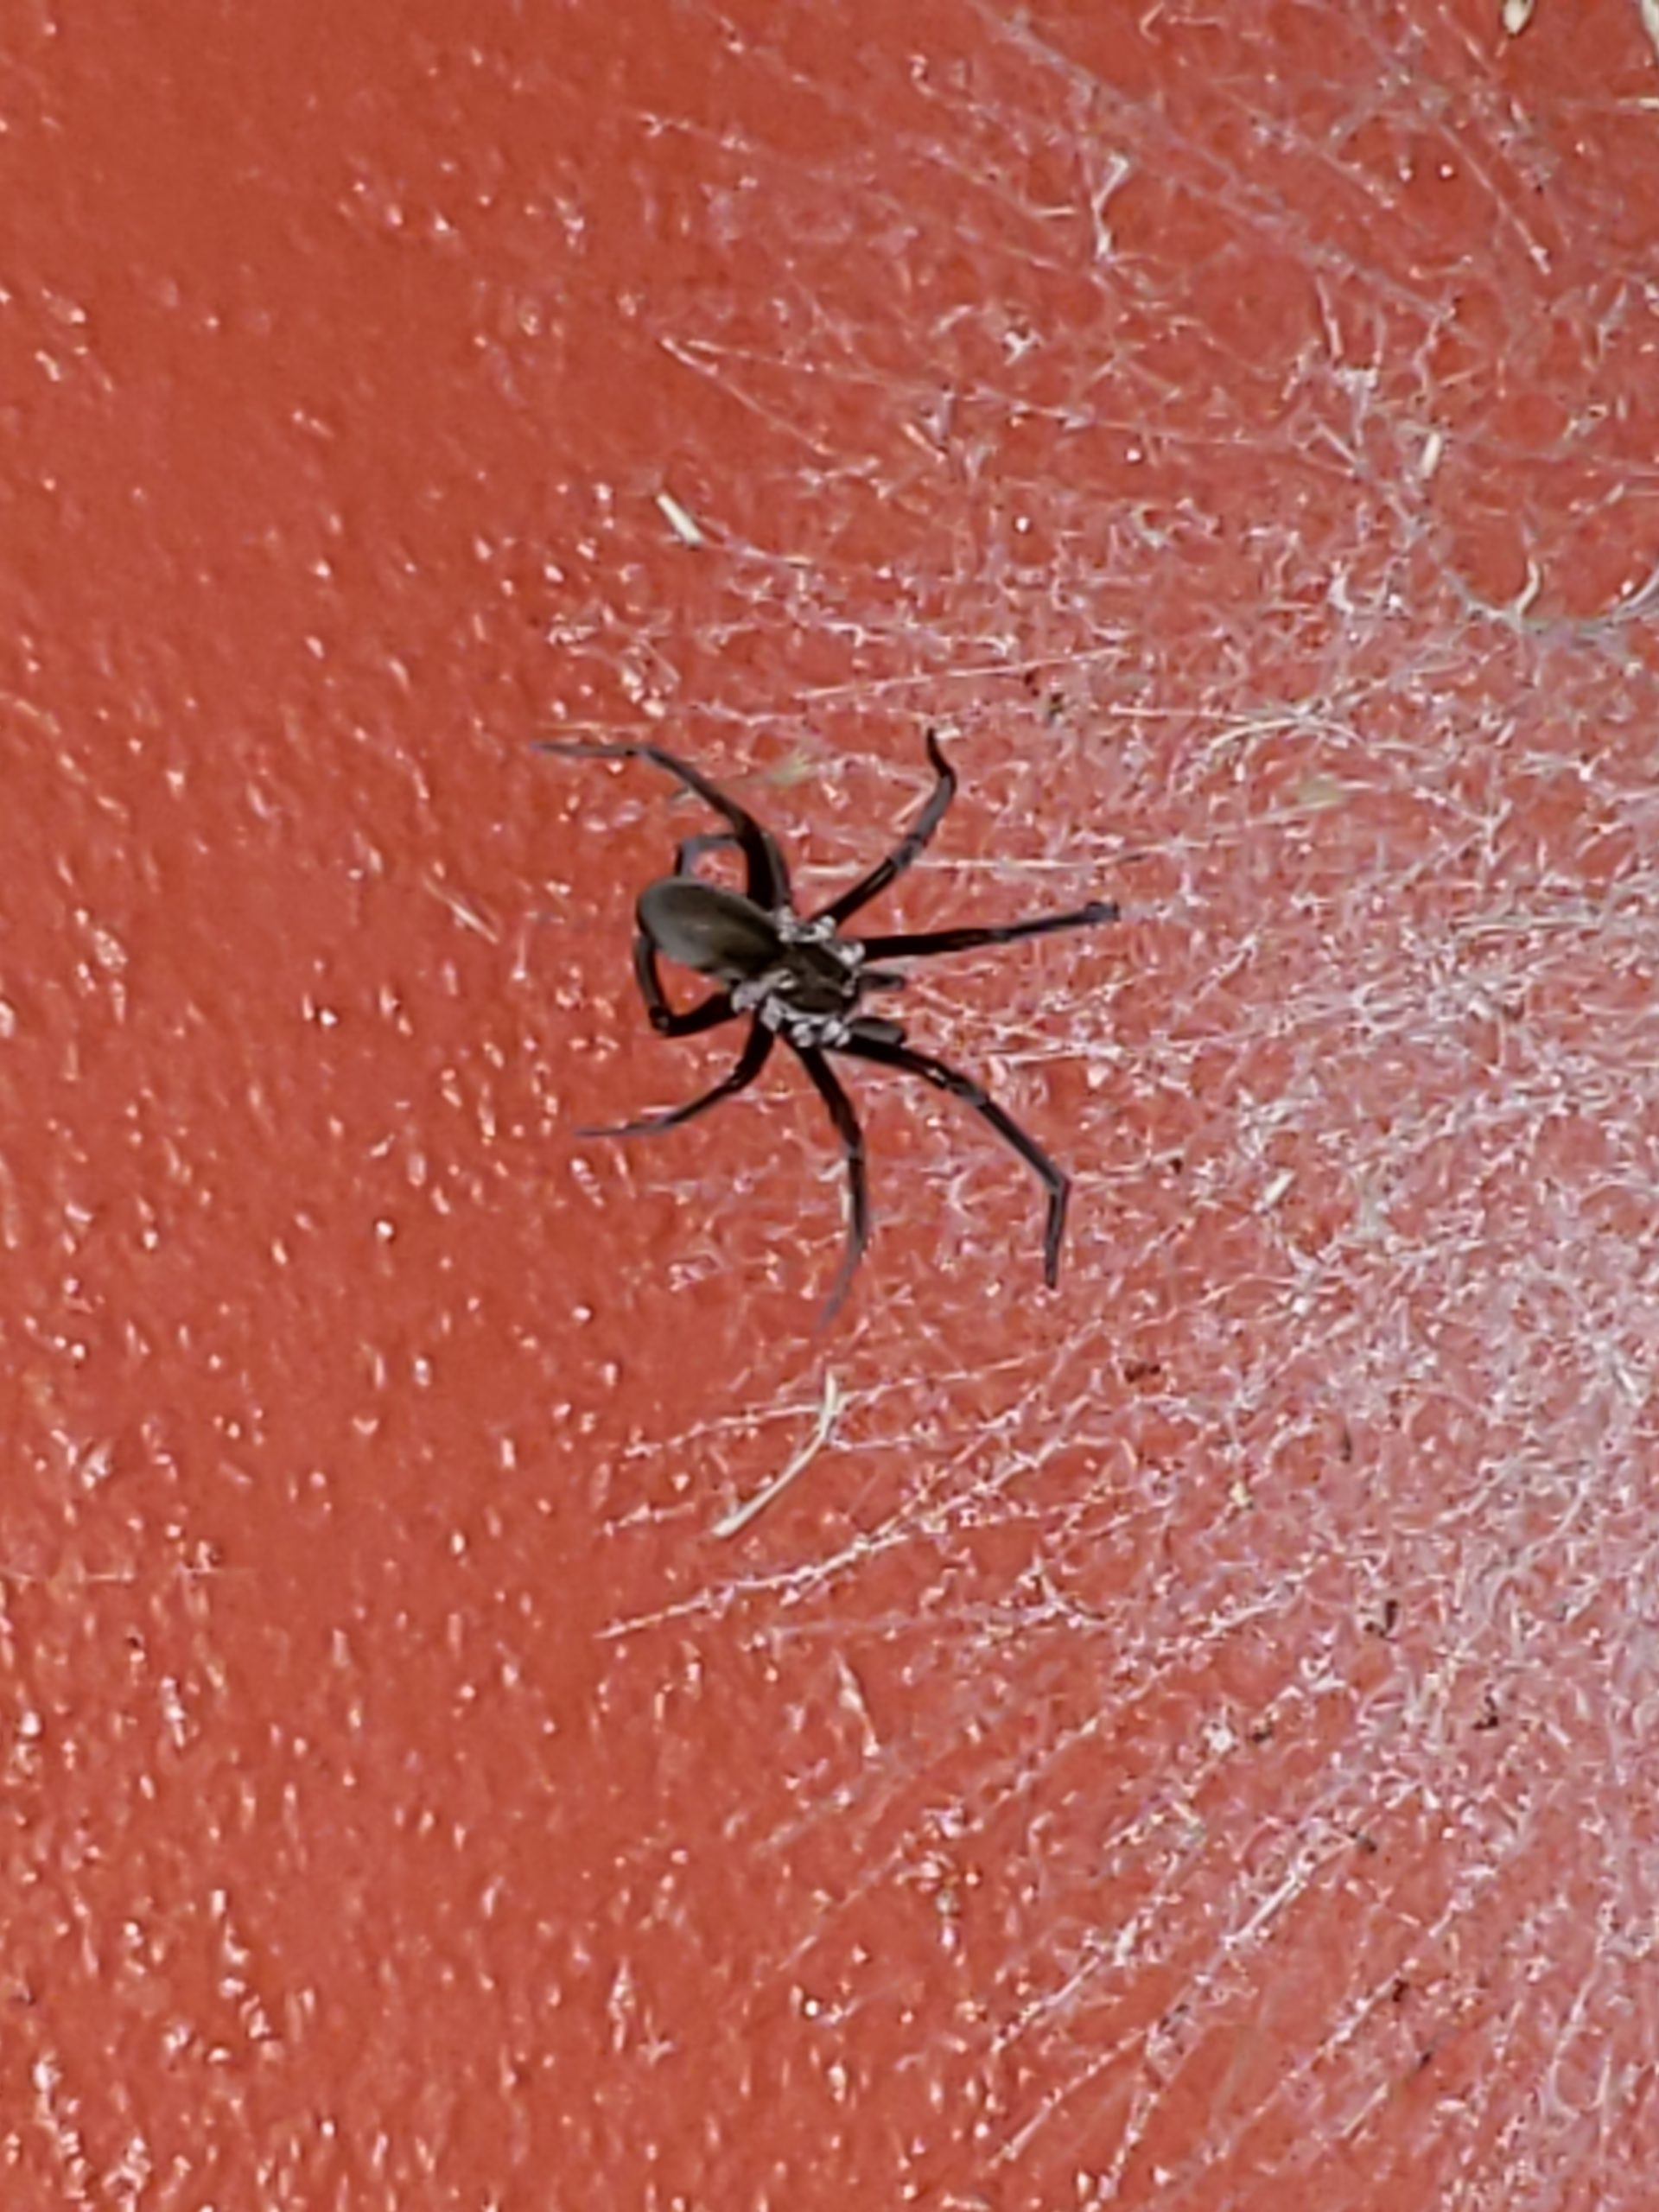 Picture of Kukulcania hibernalis (Southern House Spider) - Female - Dorsal,Webs